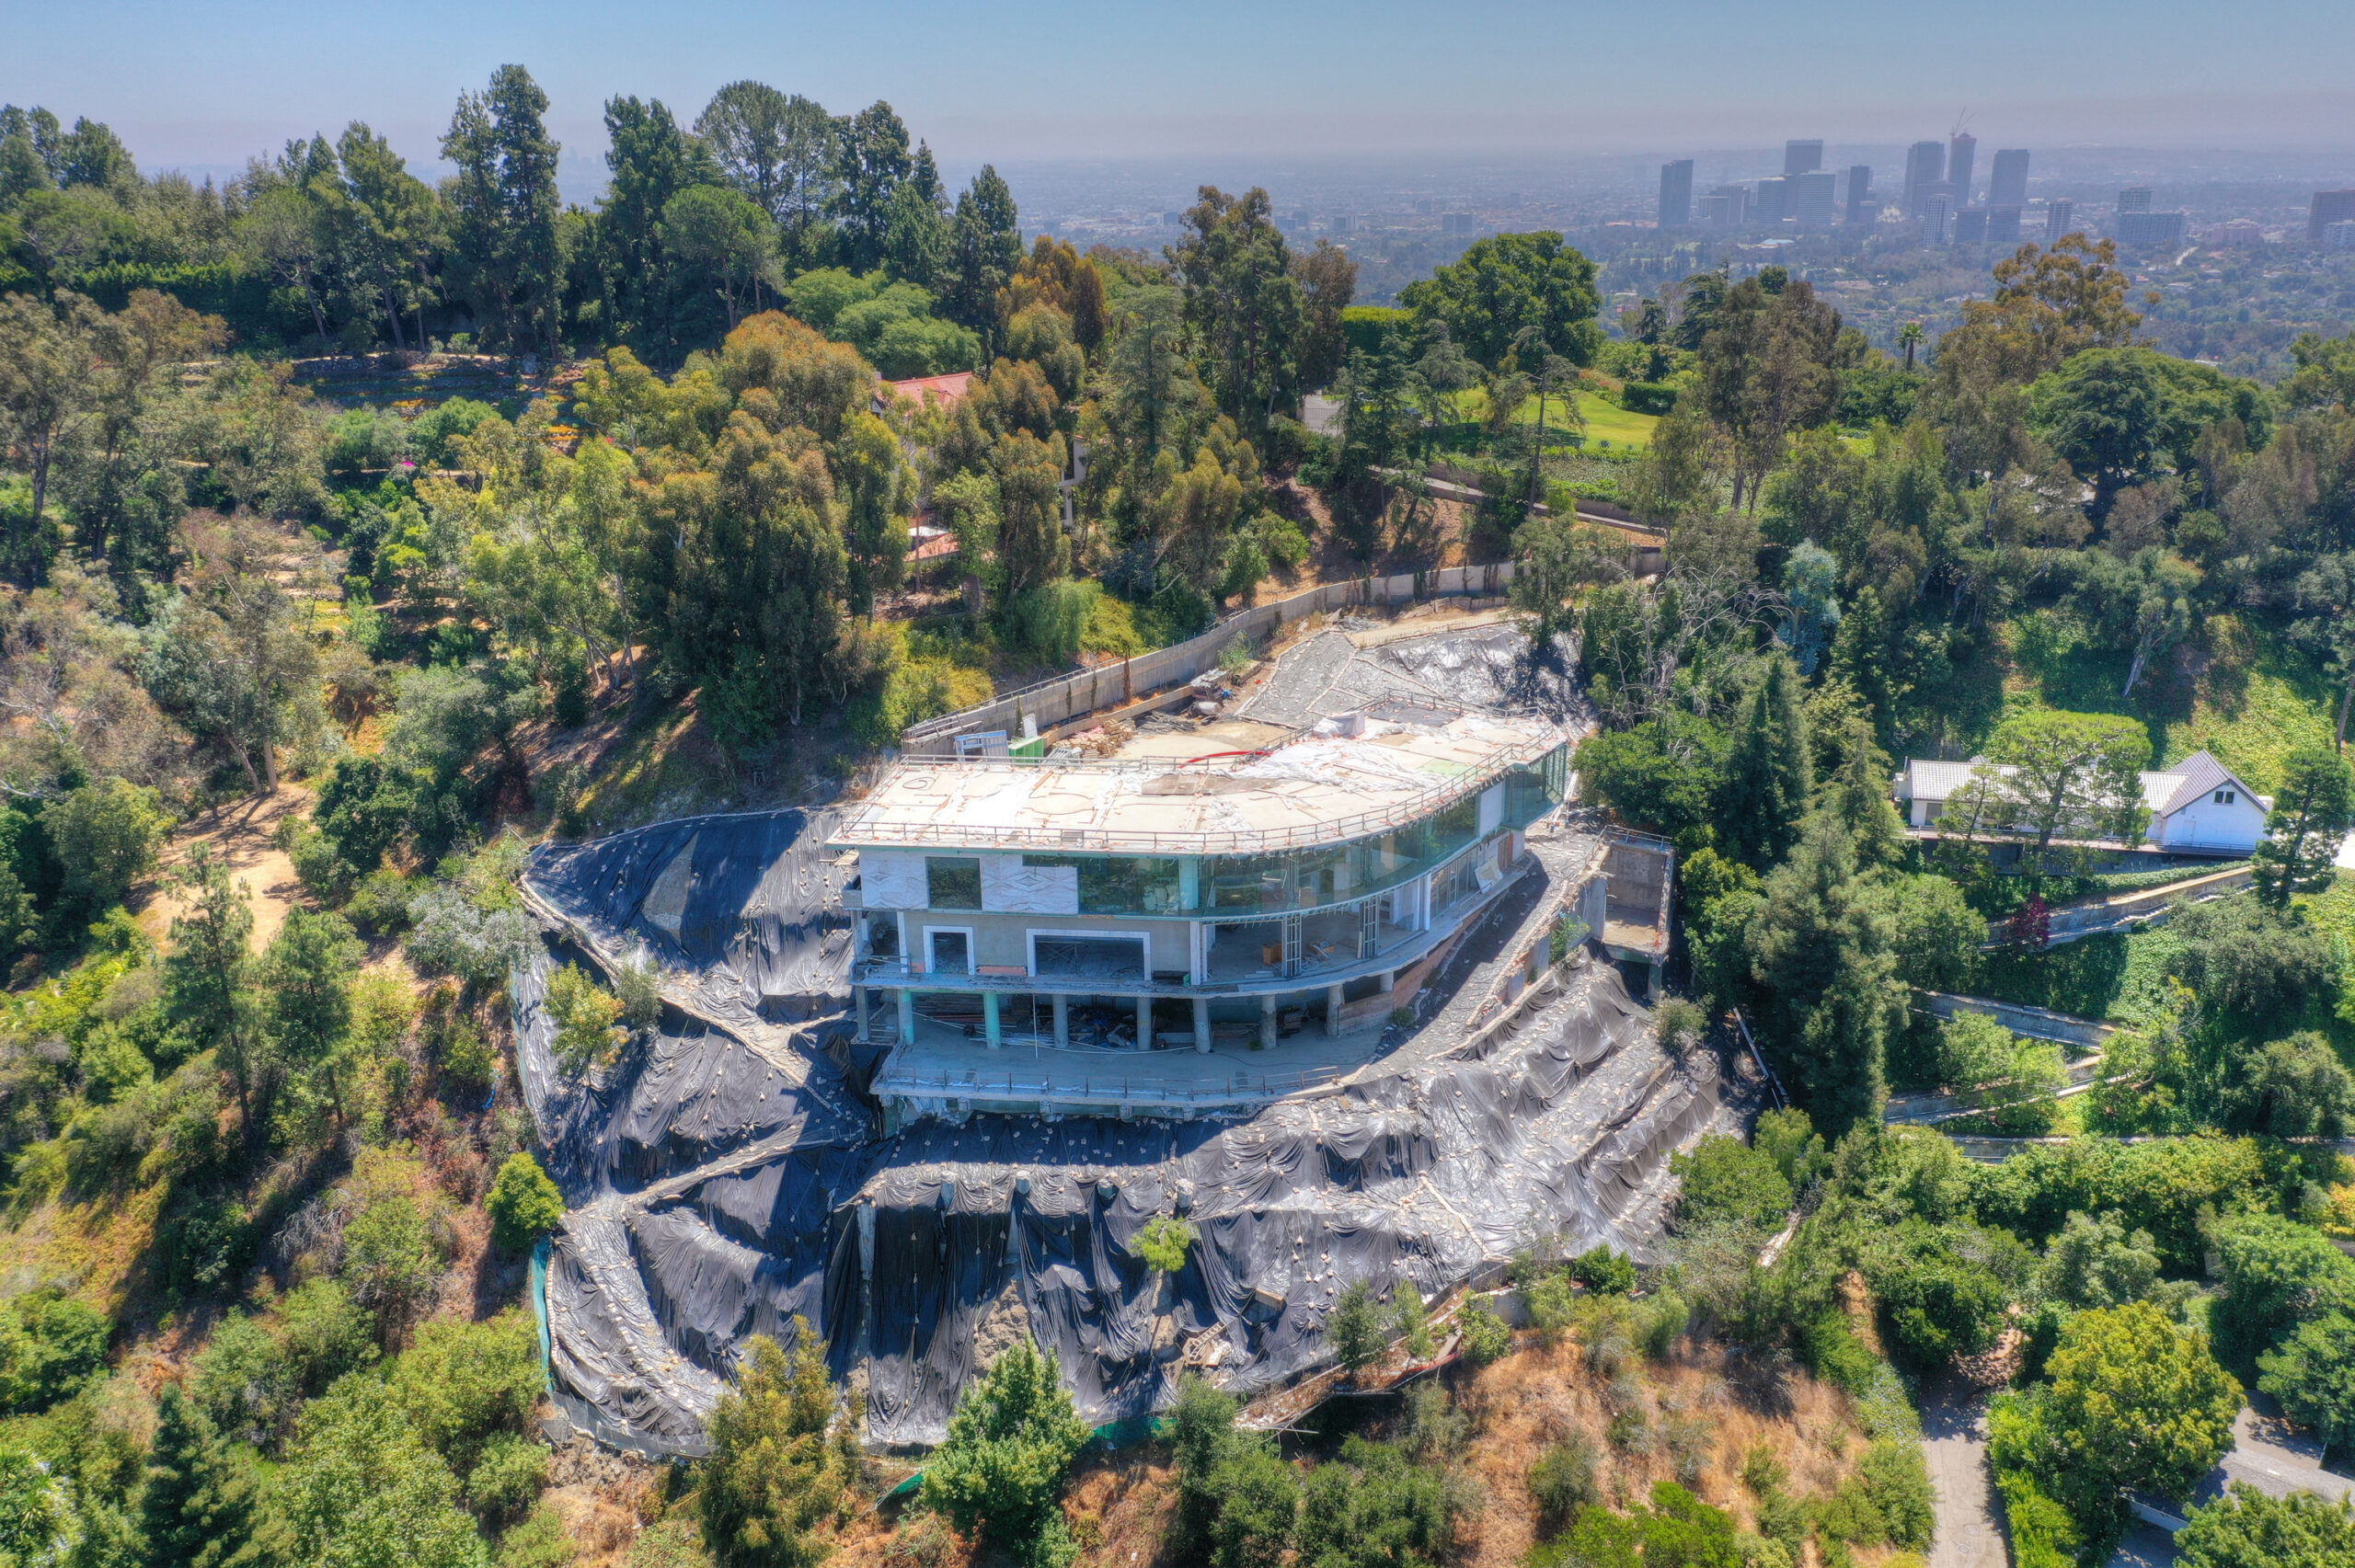 Mohamed Hadid's Controversial Bel-Air Mansion Sells at Auction for $5M, Will Be Demolished